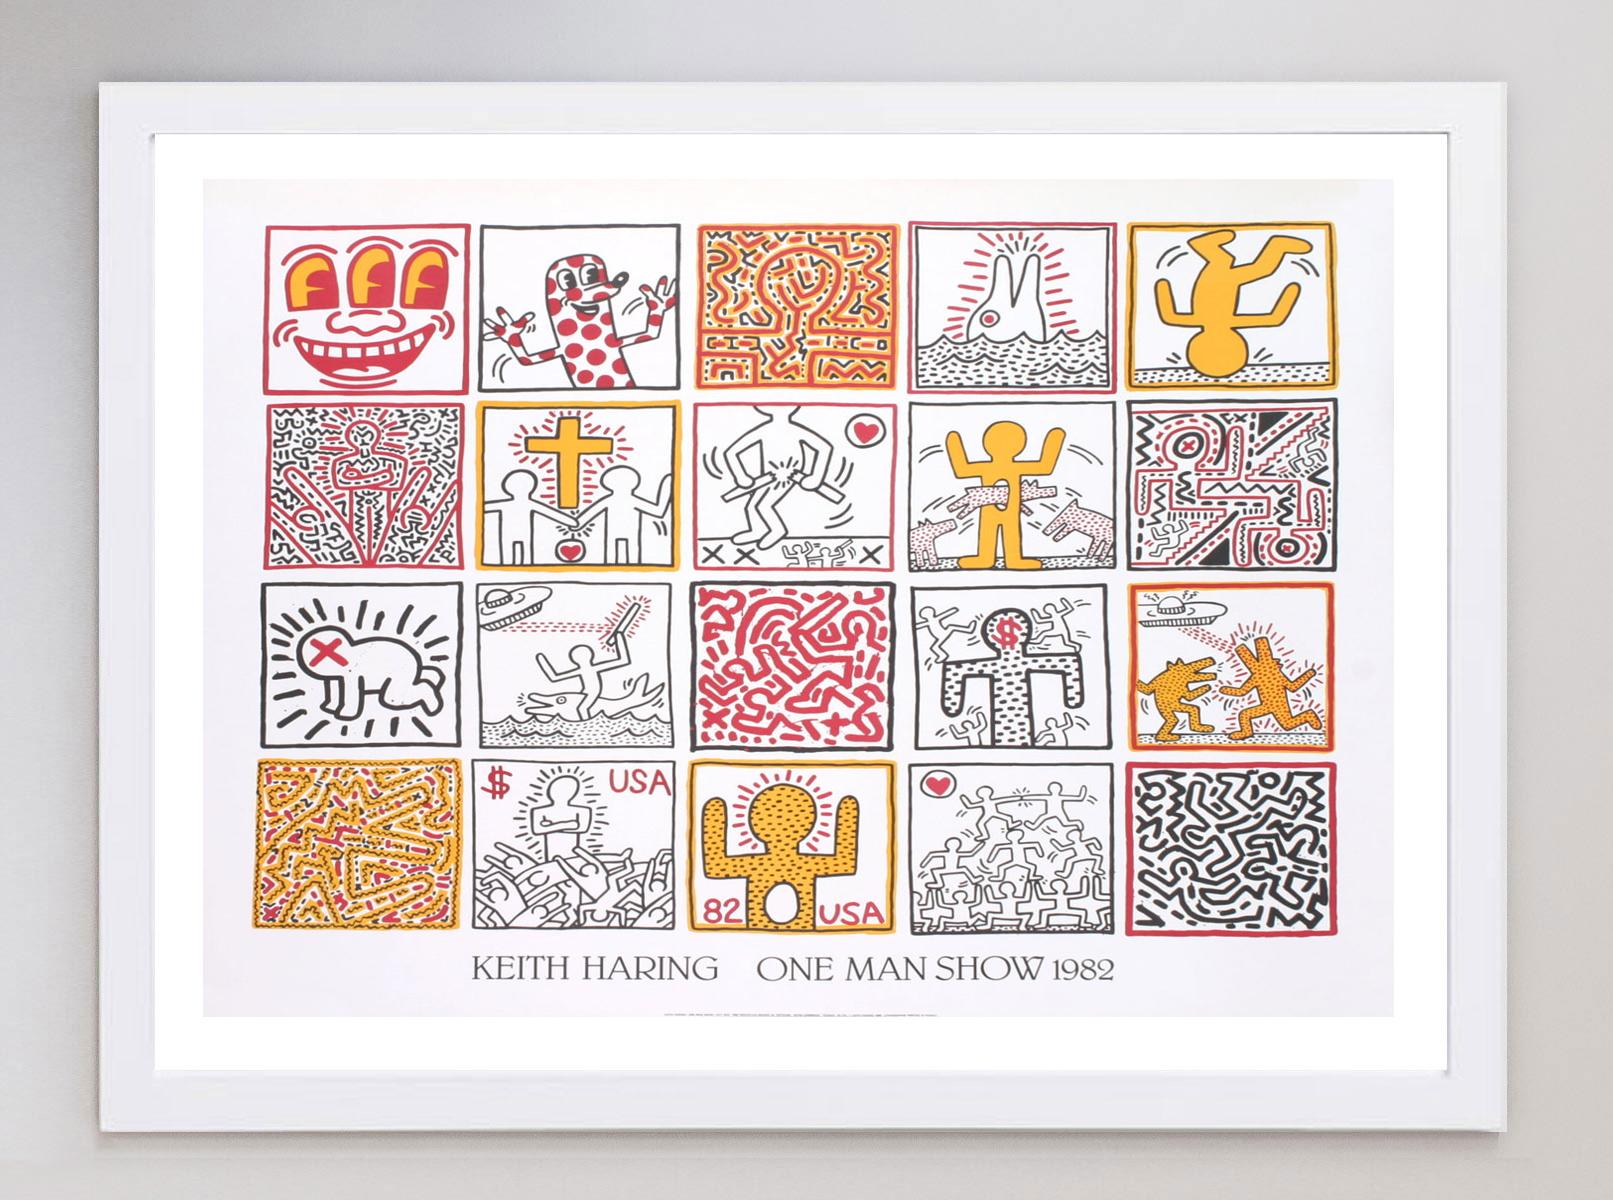 American 1986 Keith Haring, One Man Show Original Vintage Poster For Sale